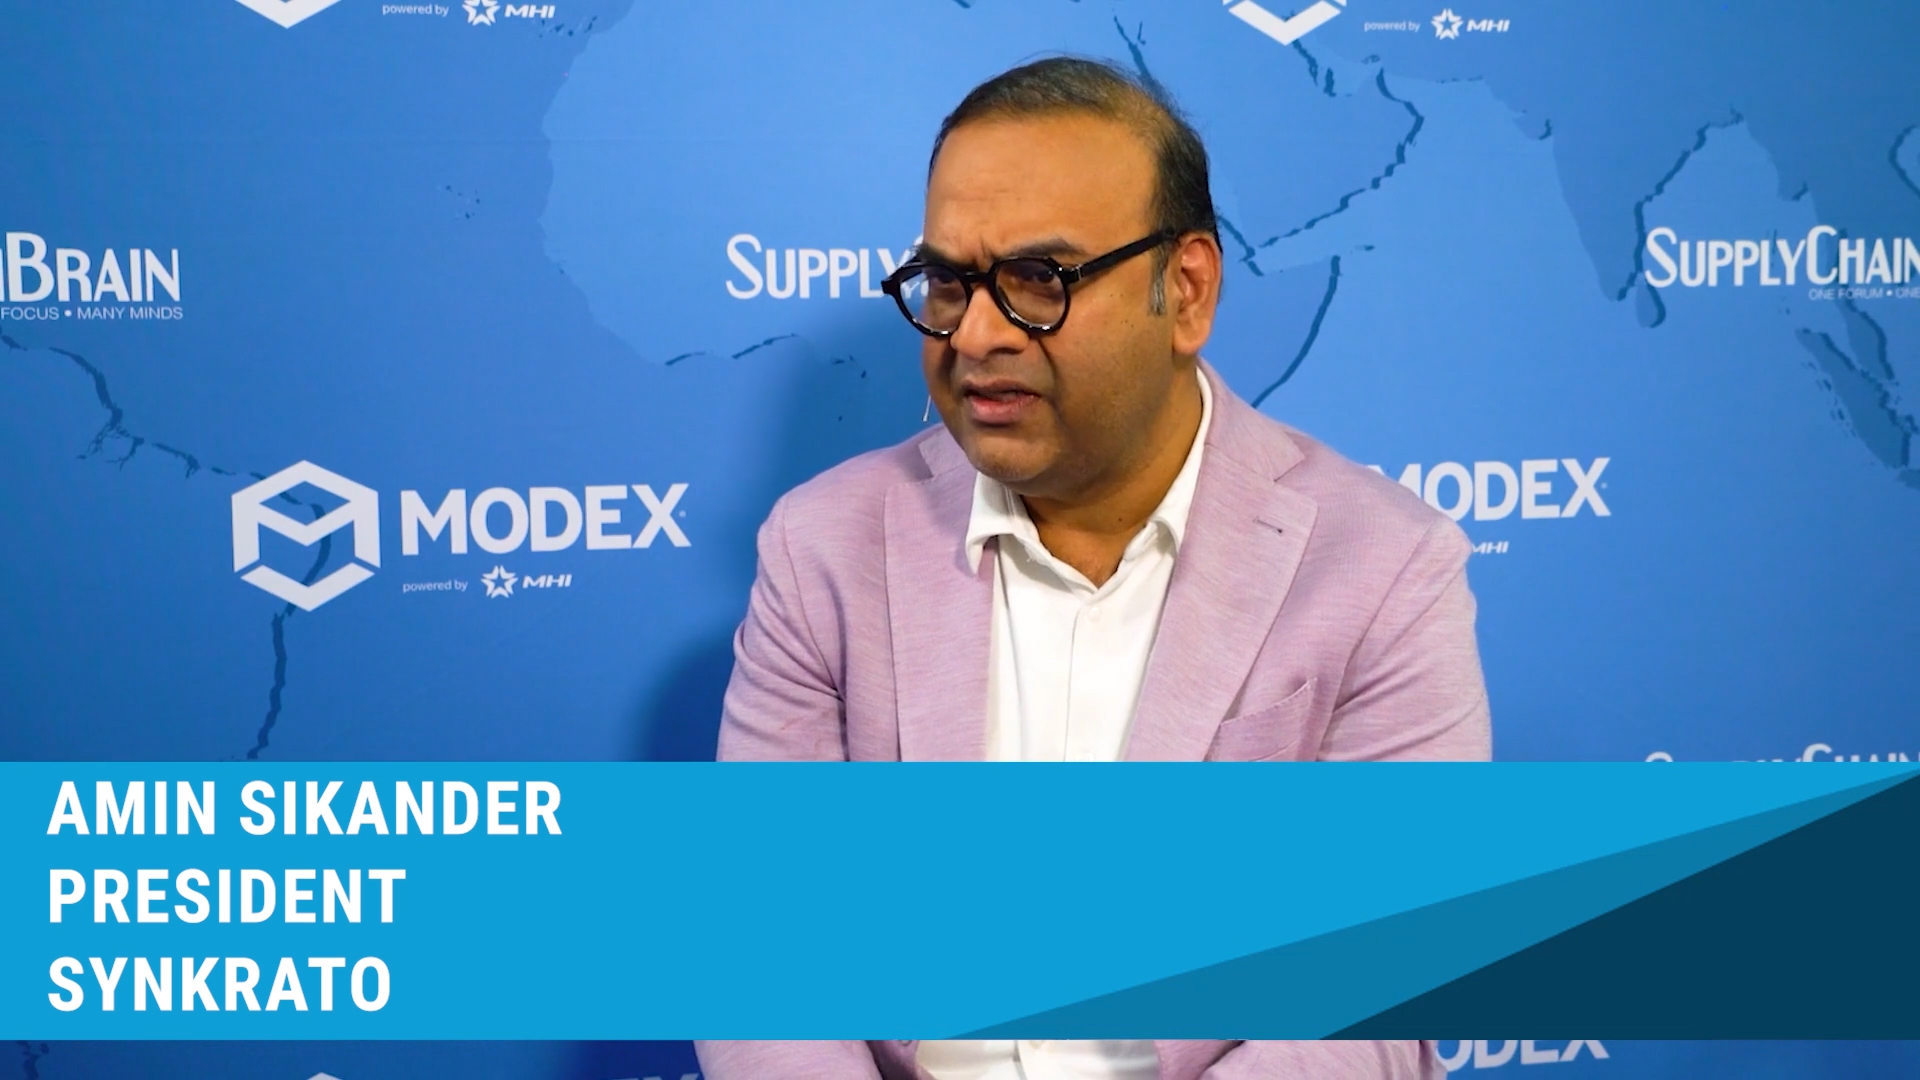 Synkrato   challenges in todays supply chains  and how technology can help   amin sikander (1080p)